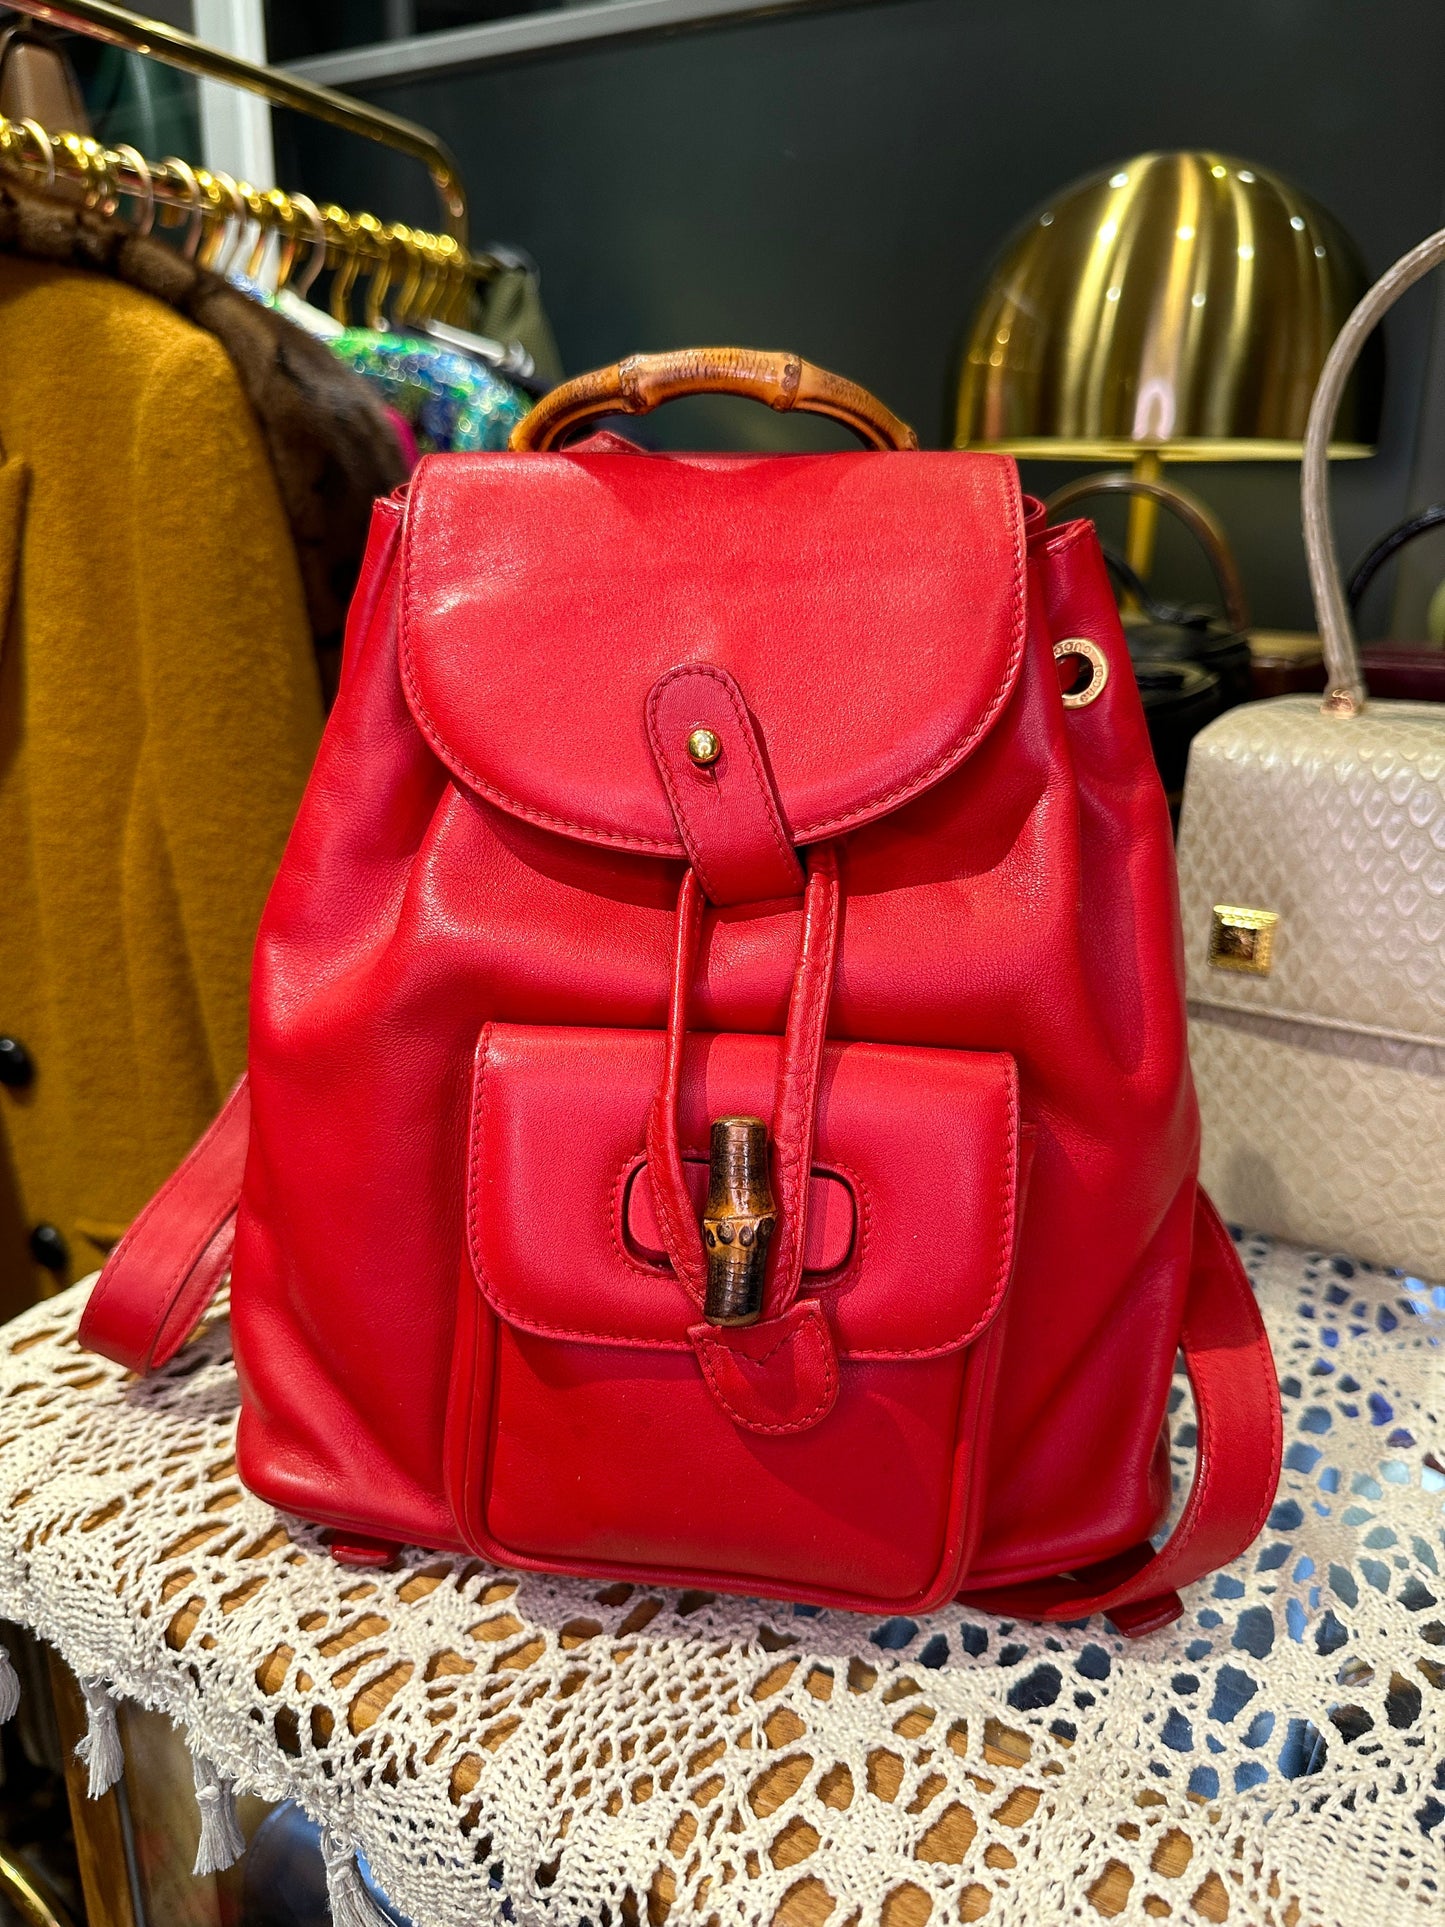 GUCCI VINTAGE 100% Authentic Genuine Leather Iconic Bamboo Handle Backpack, Medium Size, Red, 2000's, Good Condition